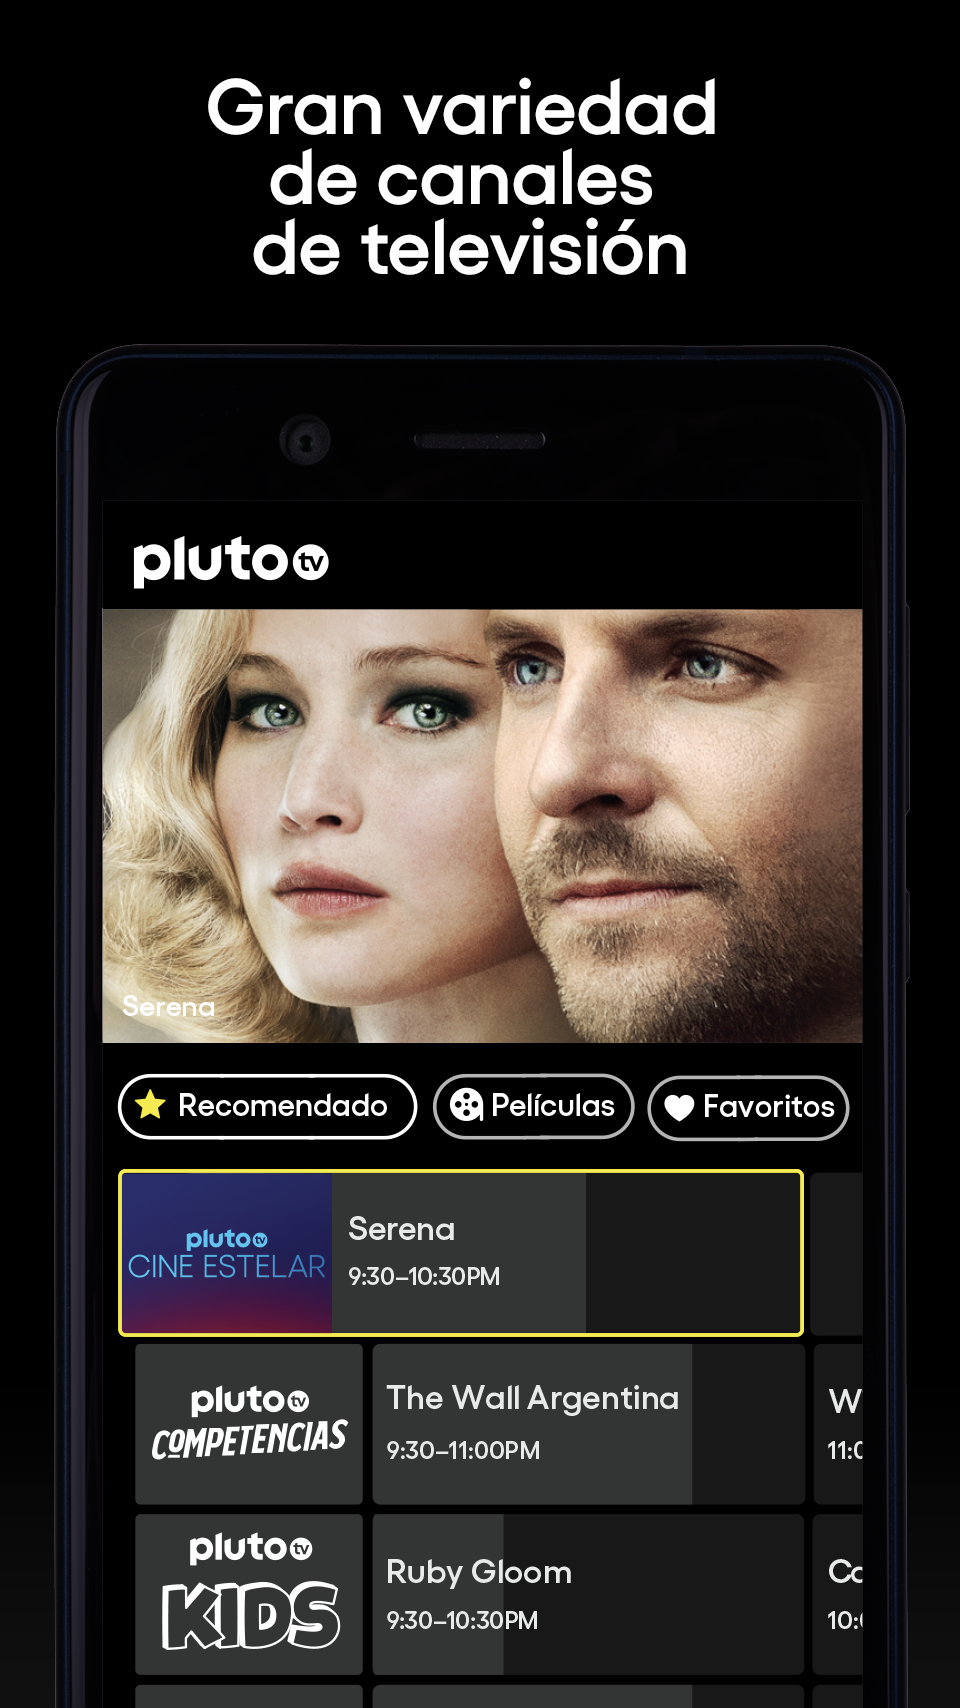 How To Get Pluto Tv On Apple Tv : Pluto Tv Lands On Apple Tv 4 : If you're a news junkie, we've ...